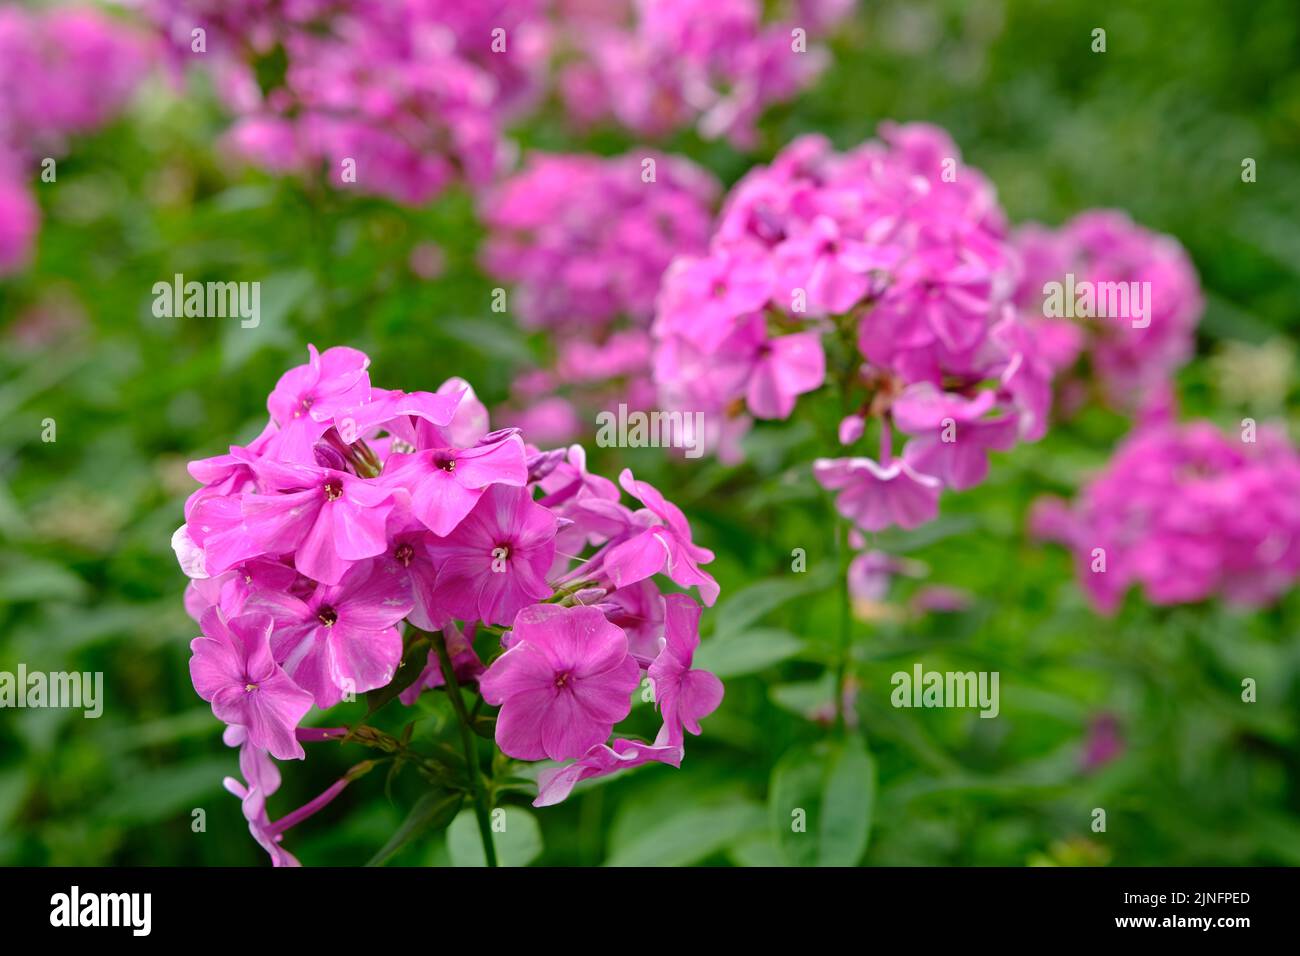 Bush of blooming Phlox Paniculata Pink Flame flowers in the garden on a sunny day Stock Photo